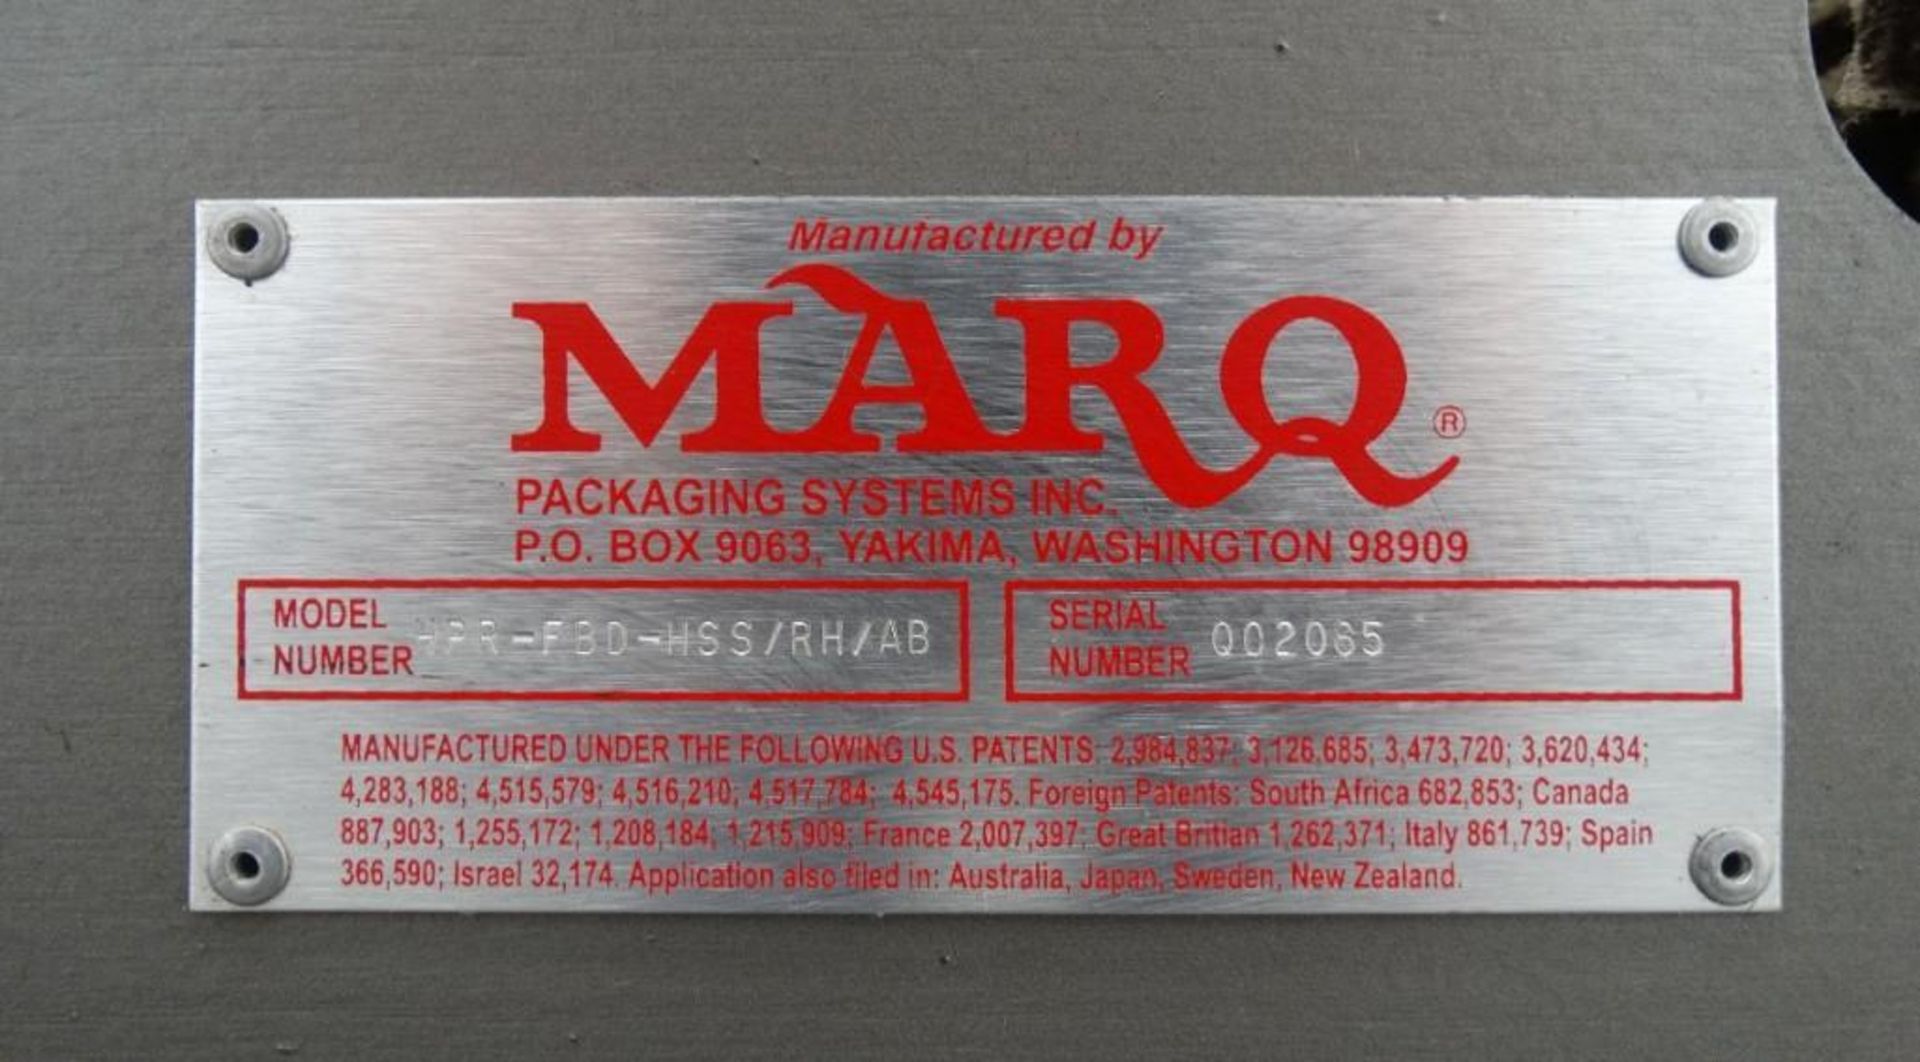 MARQ HPR-FBD-HSS/RH/AB Glue and Tape Case Sealer - Image 17 of 17